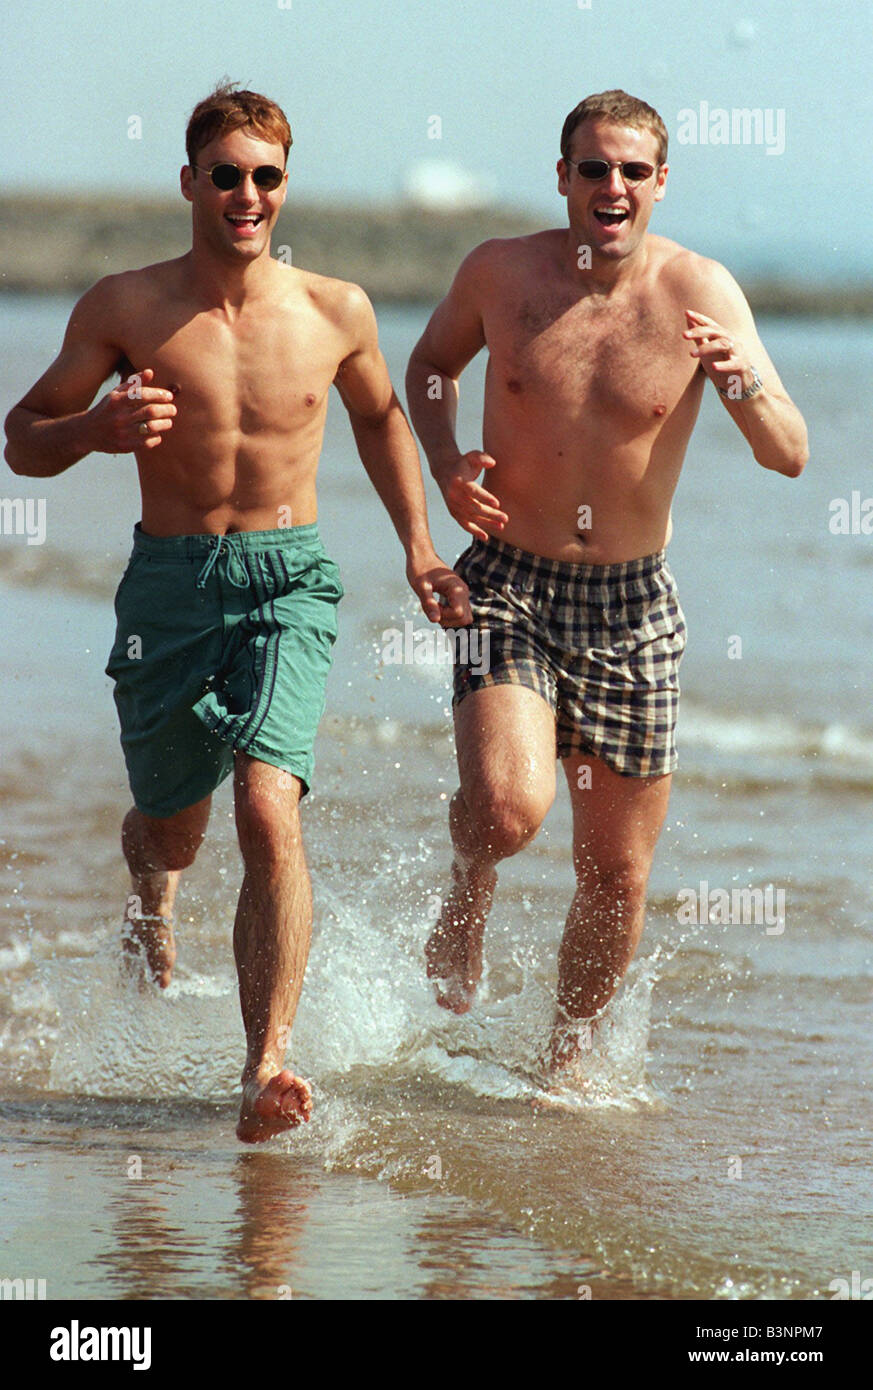 Paul L wears swimming shorts by Moto and Mark wears Speedo checked shorts sunglasses June 1997 Stock Photo